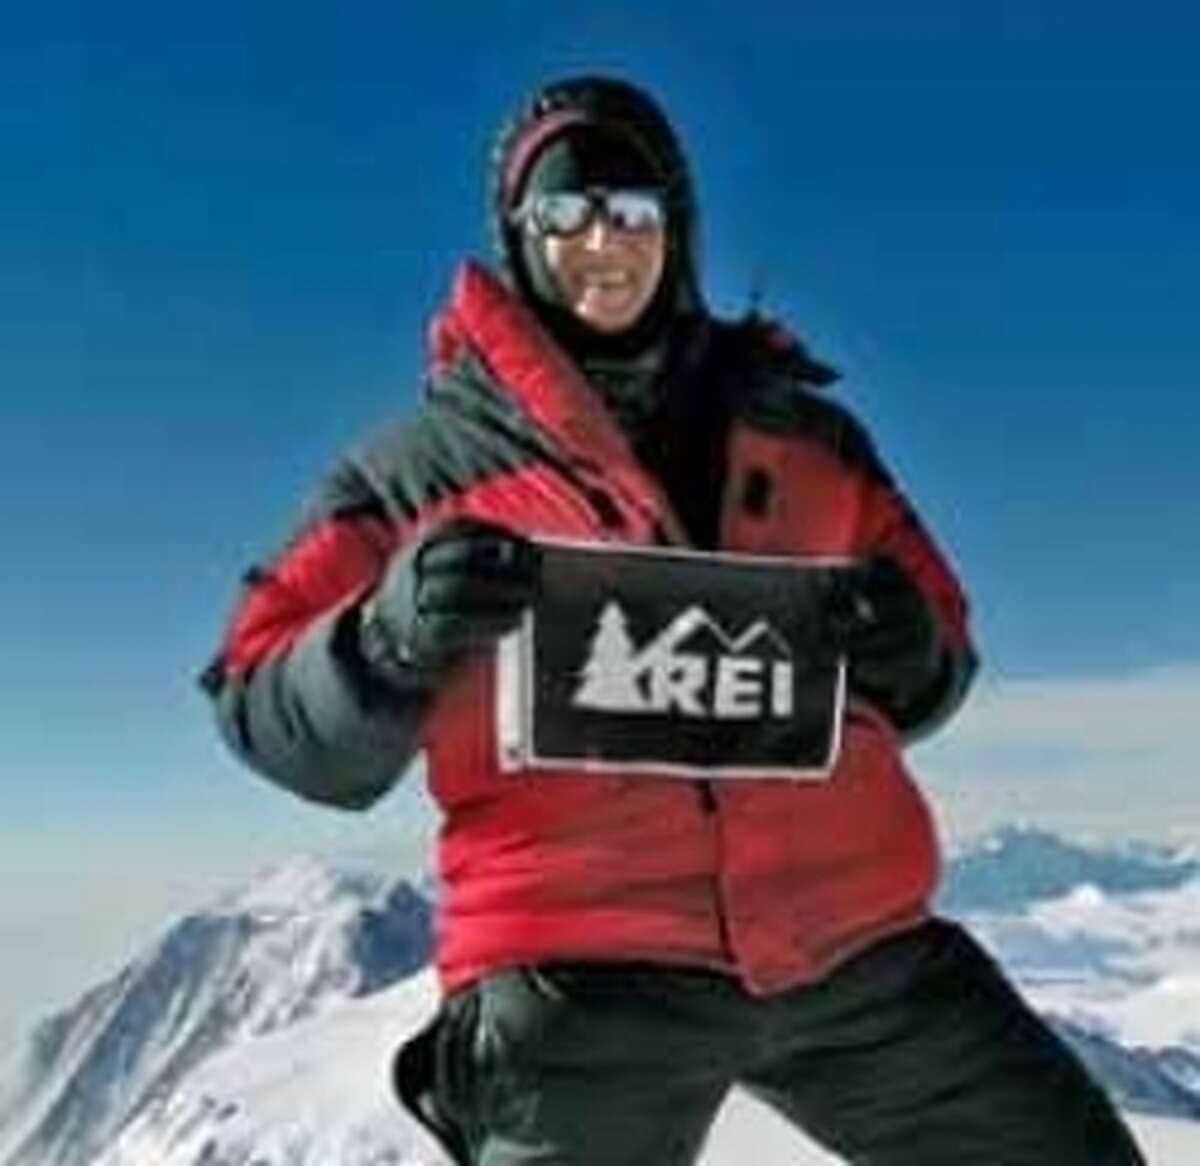 Then-REI chief executive Sally Jewell climbed to the highest summit in Antarctica before she became U.S. Interior secretary under President Obama.